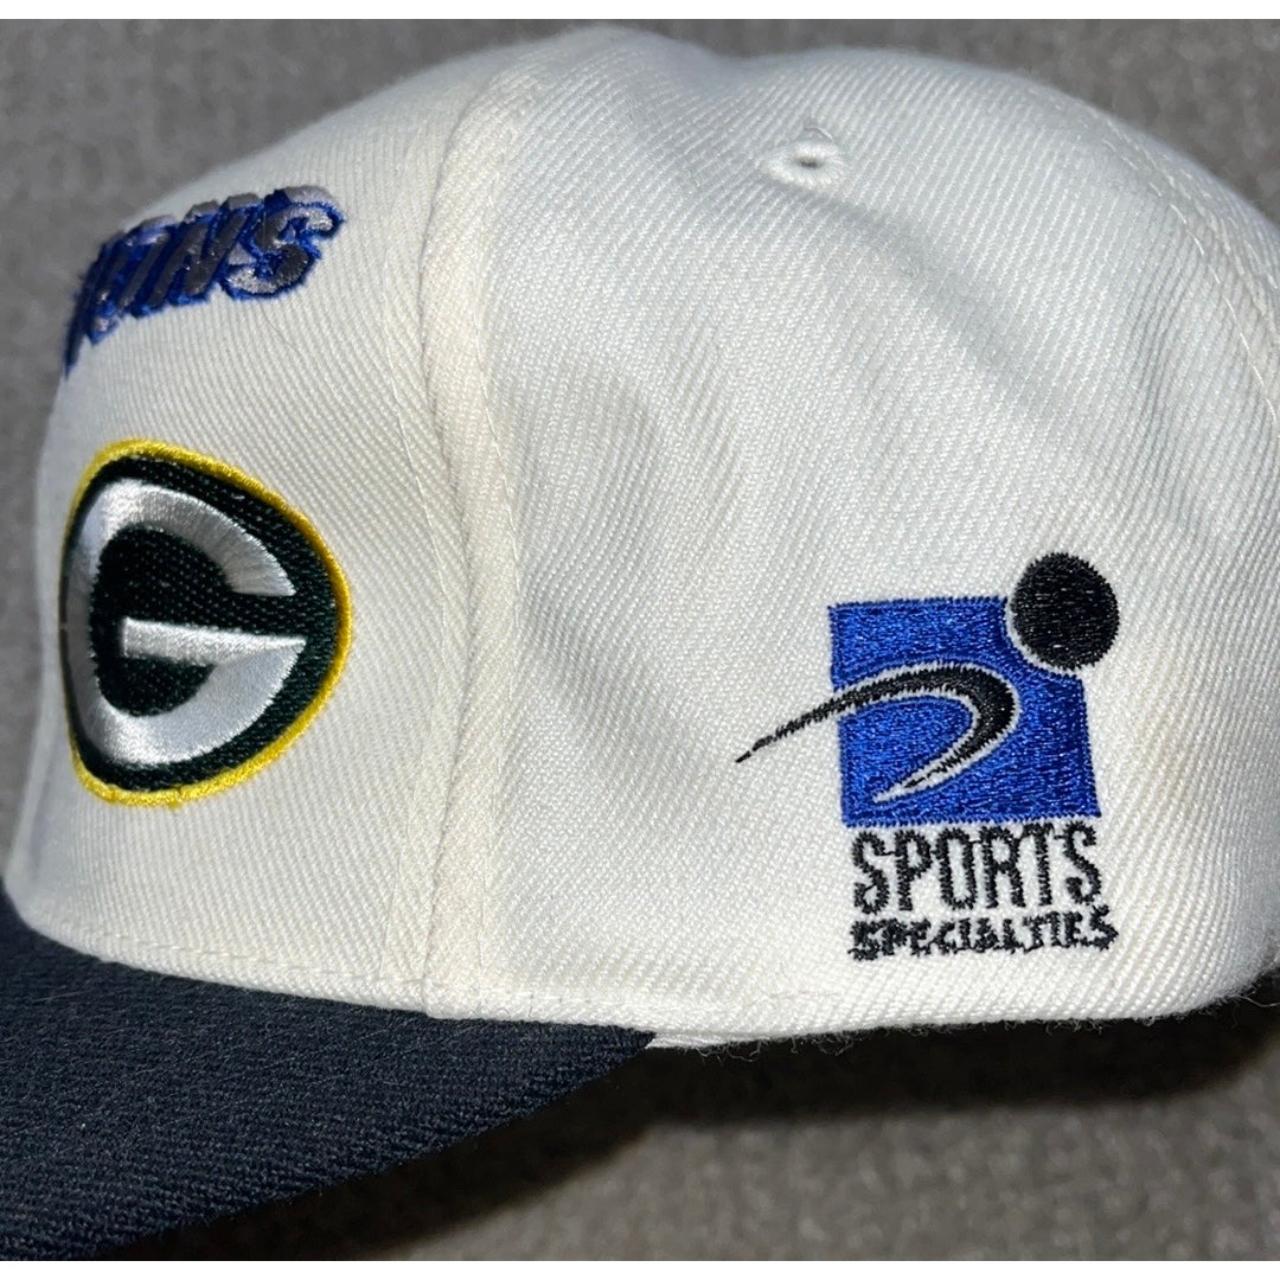 1996 Green Bay Packers NFC Champions Hat - Depop